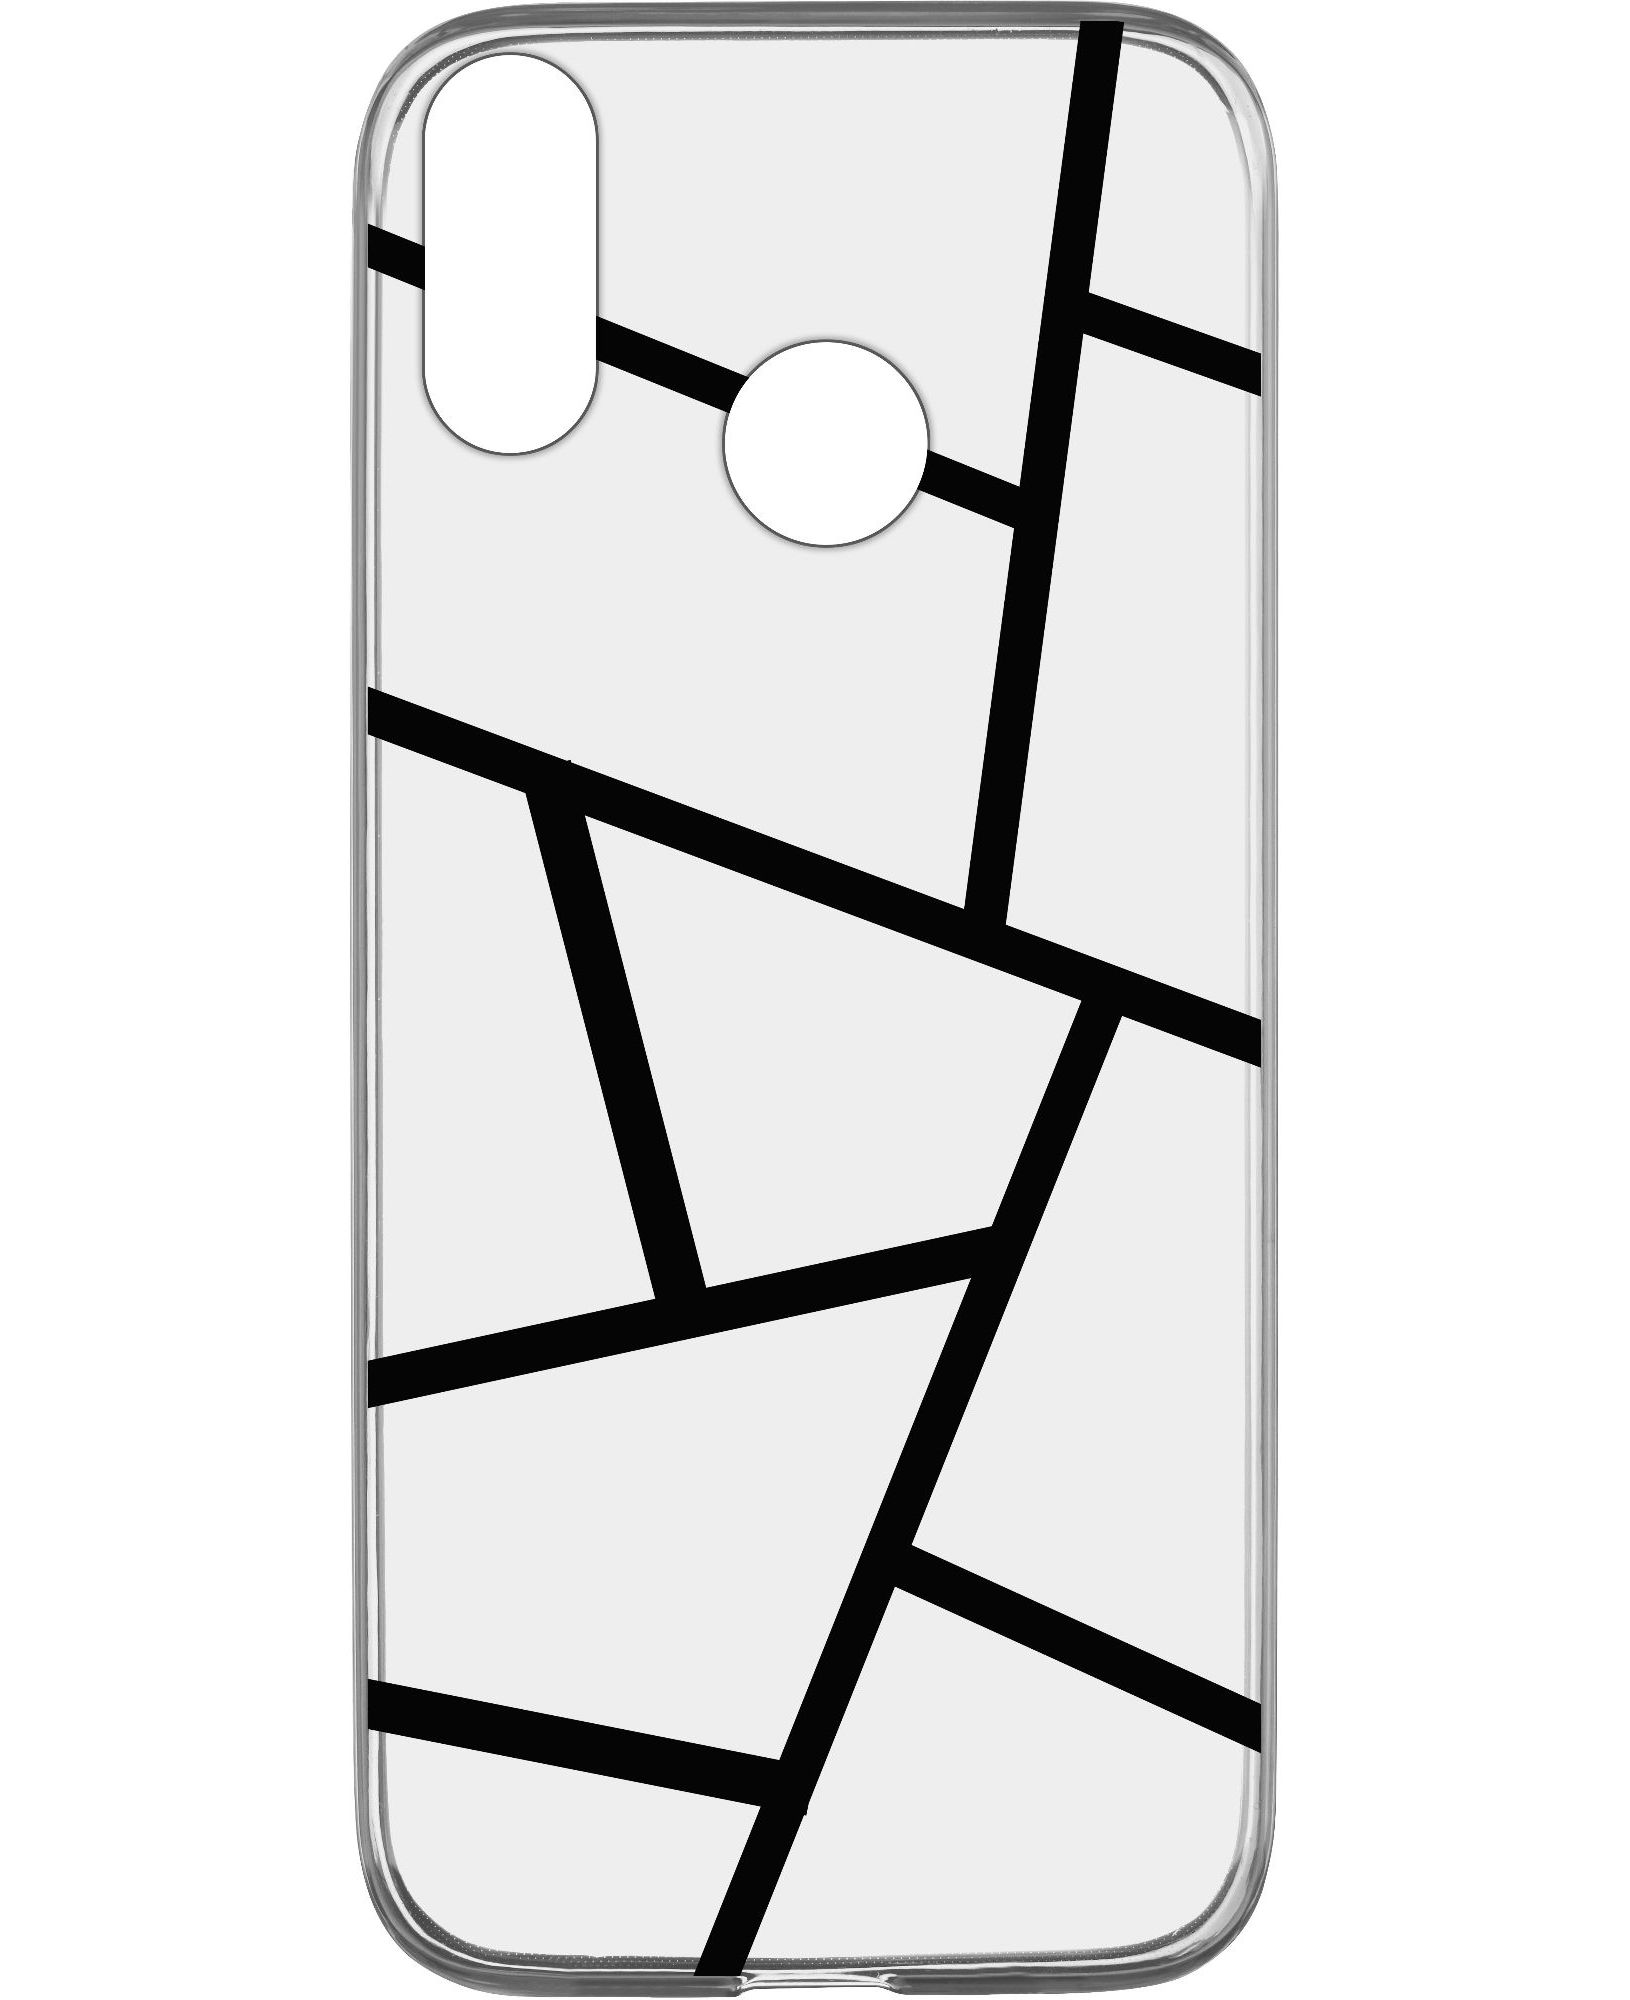 Huawei P20 Lite, case style, architecture